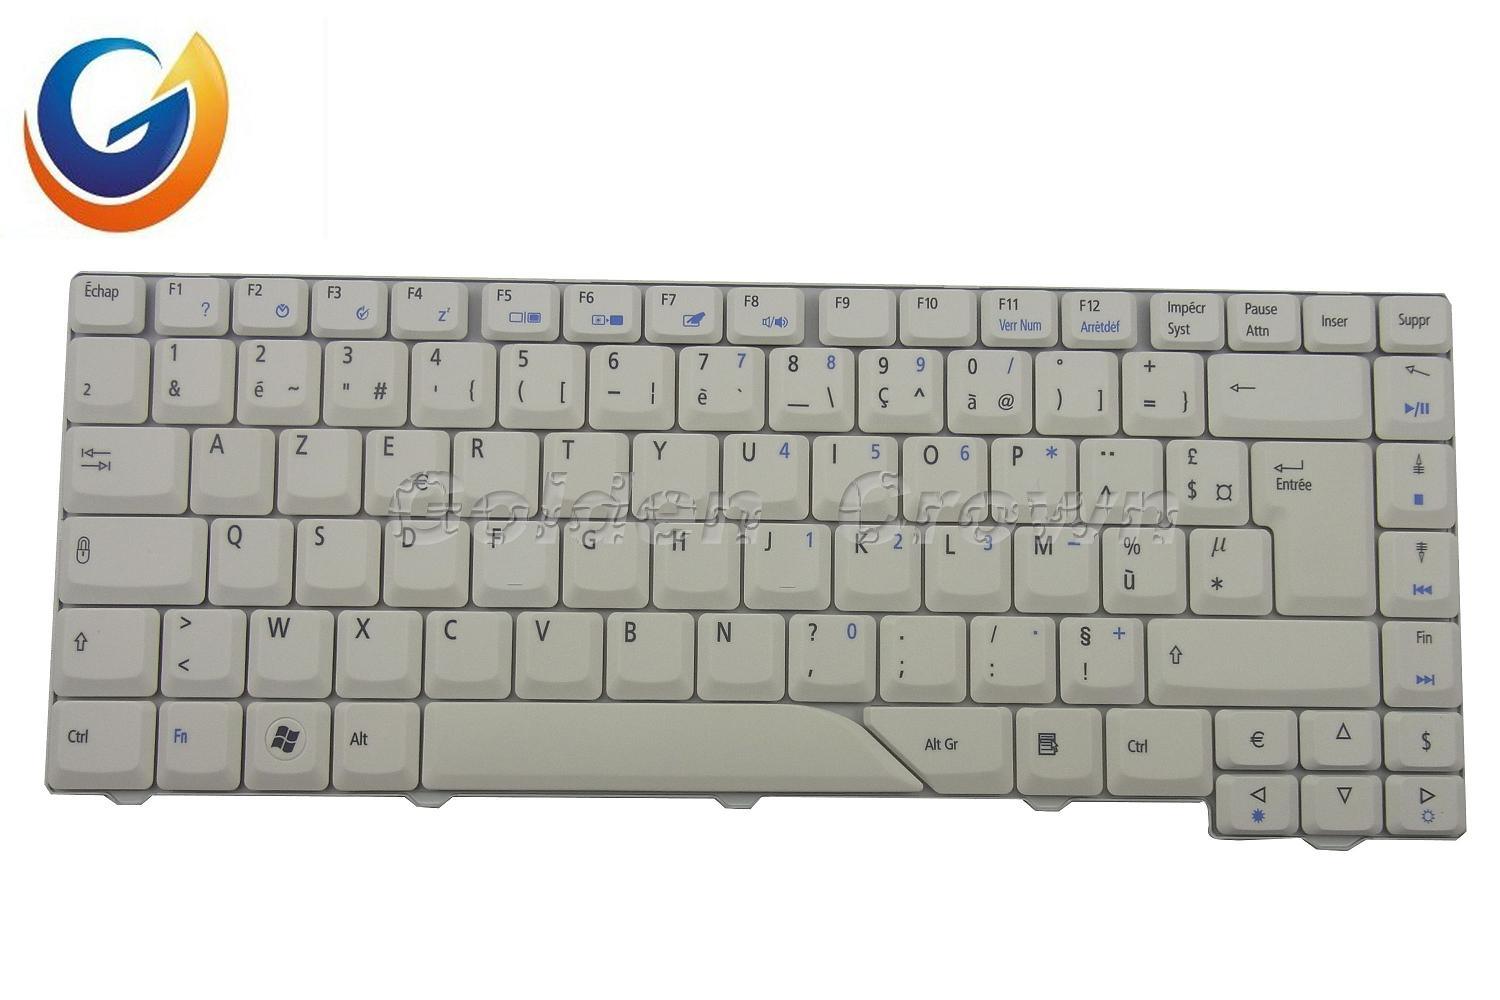 Laptop Keyboard for Acer Aspire 4720 4710G 4920G US FR HR BR Layout Gray-White